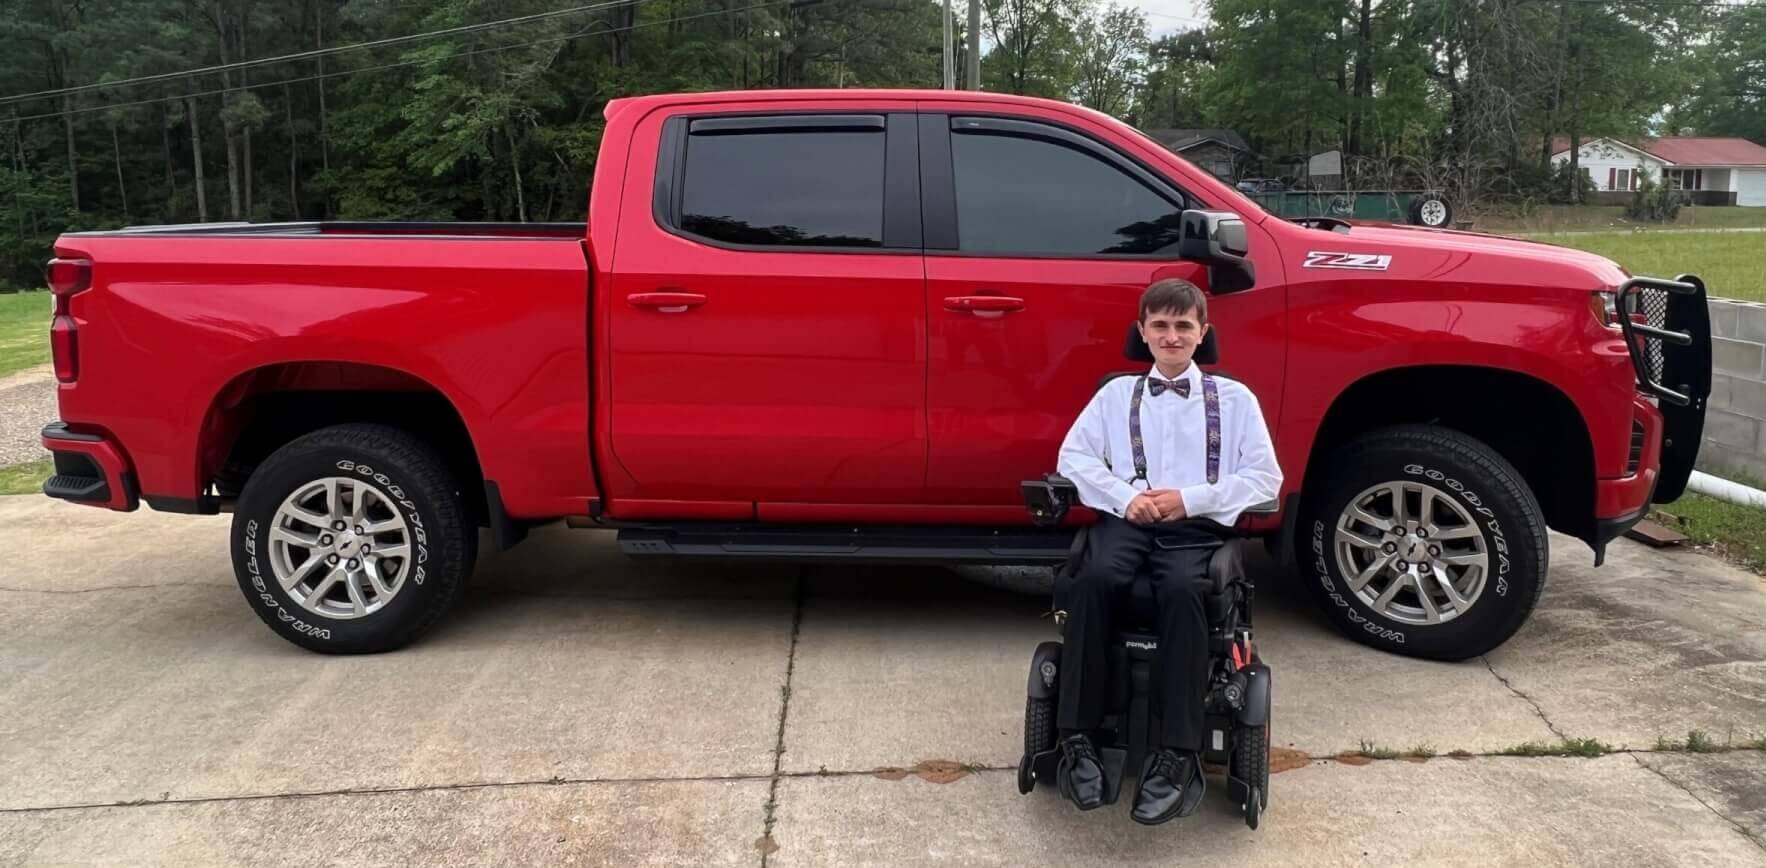 High school senior, dressed up in formalwear, sits in his wheelchair in front of a shiny red 2022 Chevy Silverado